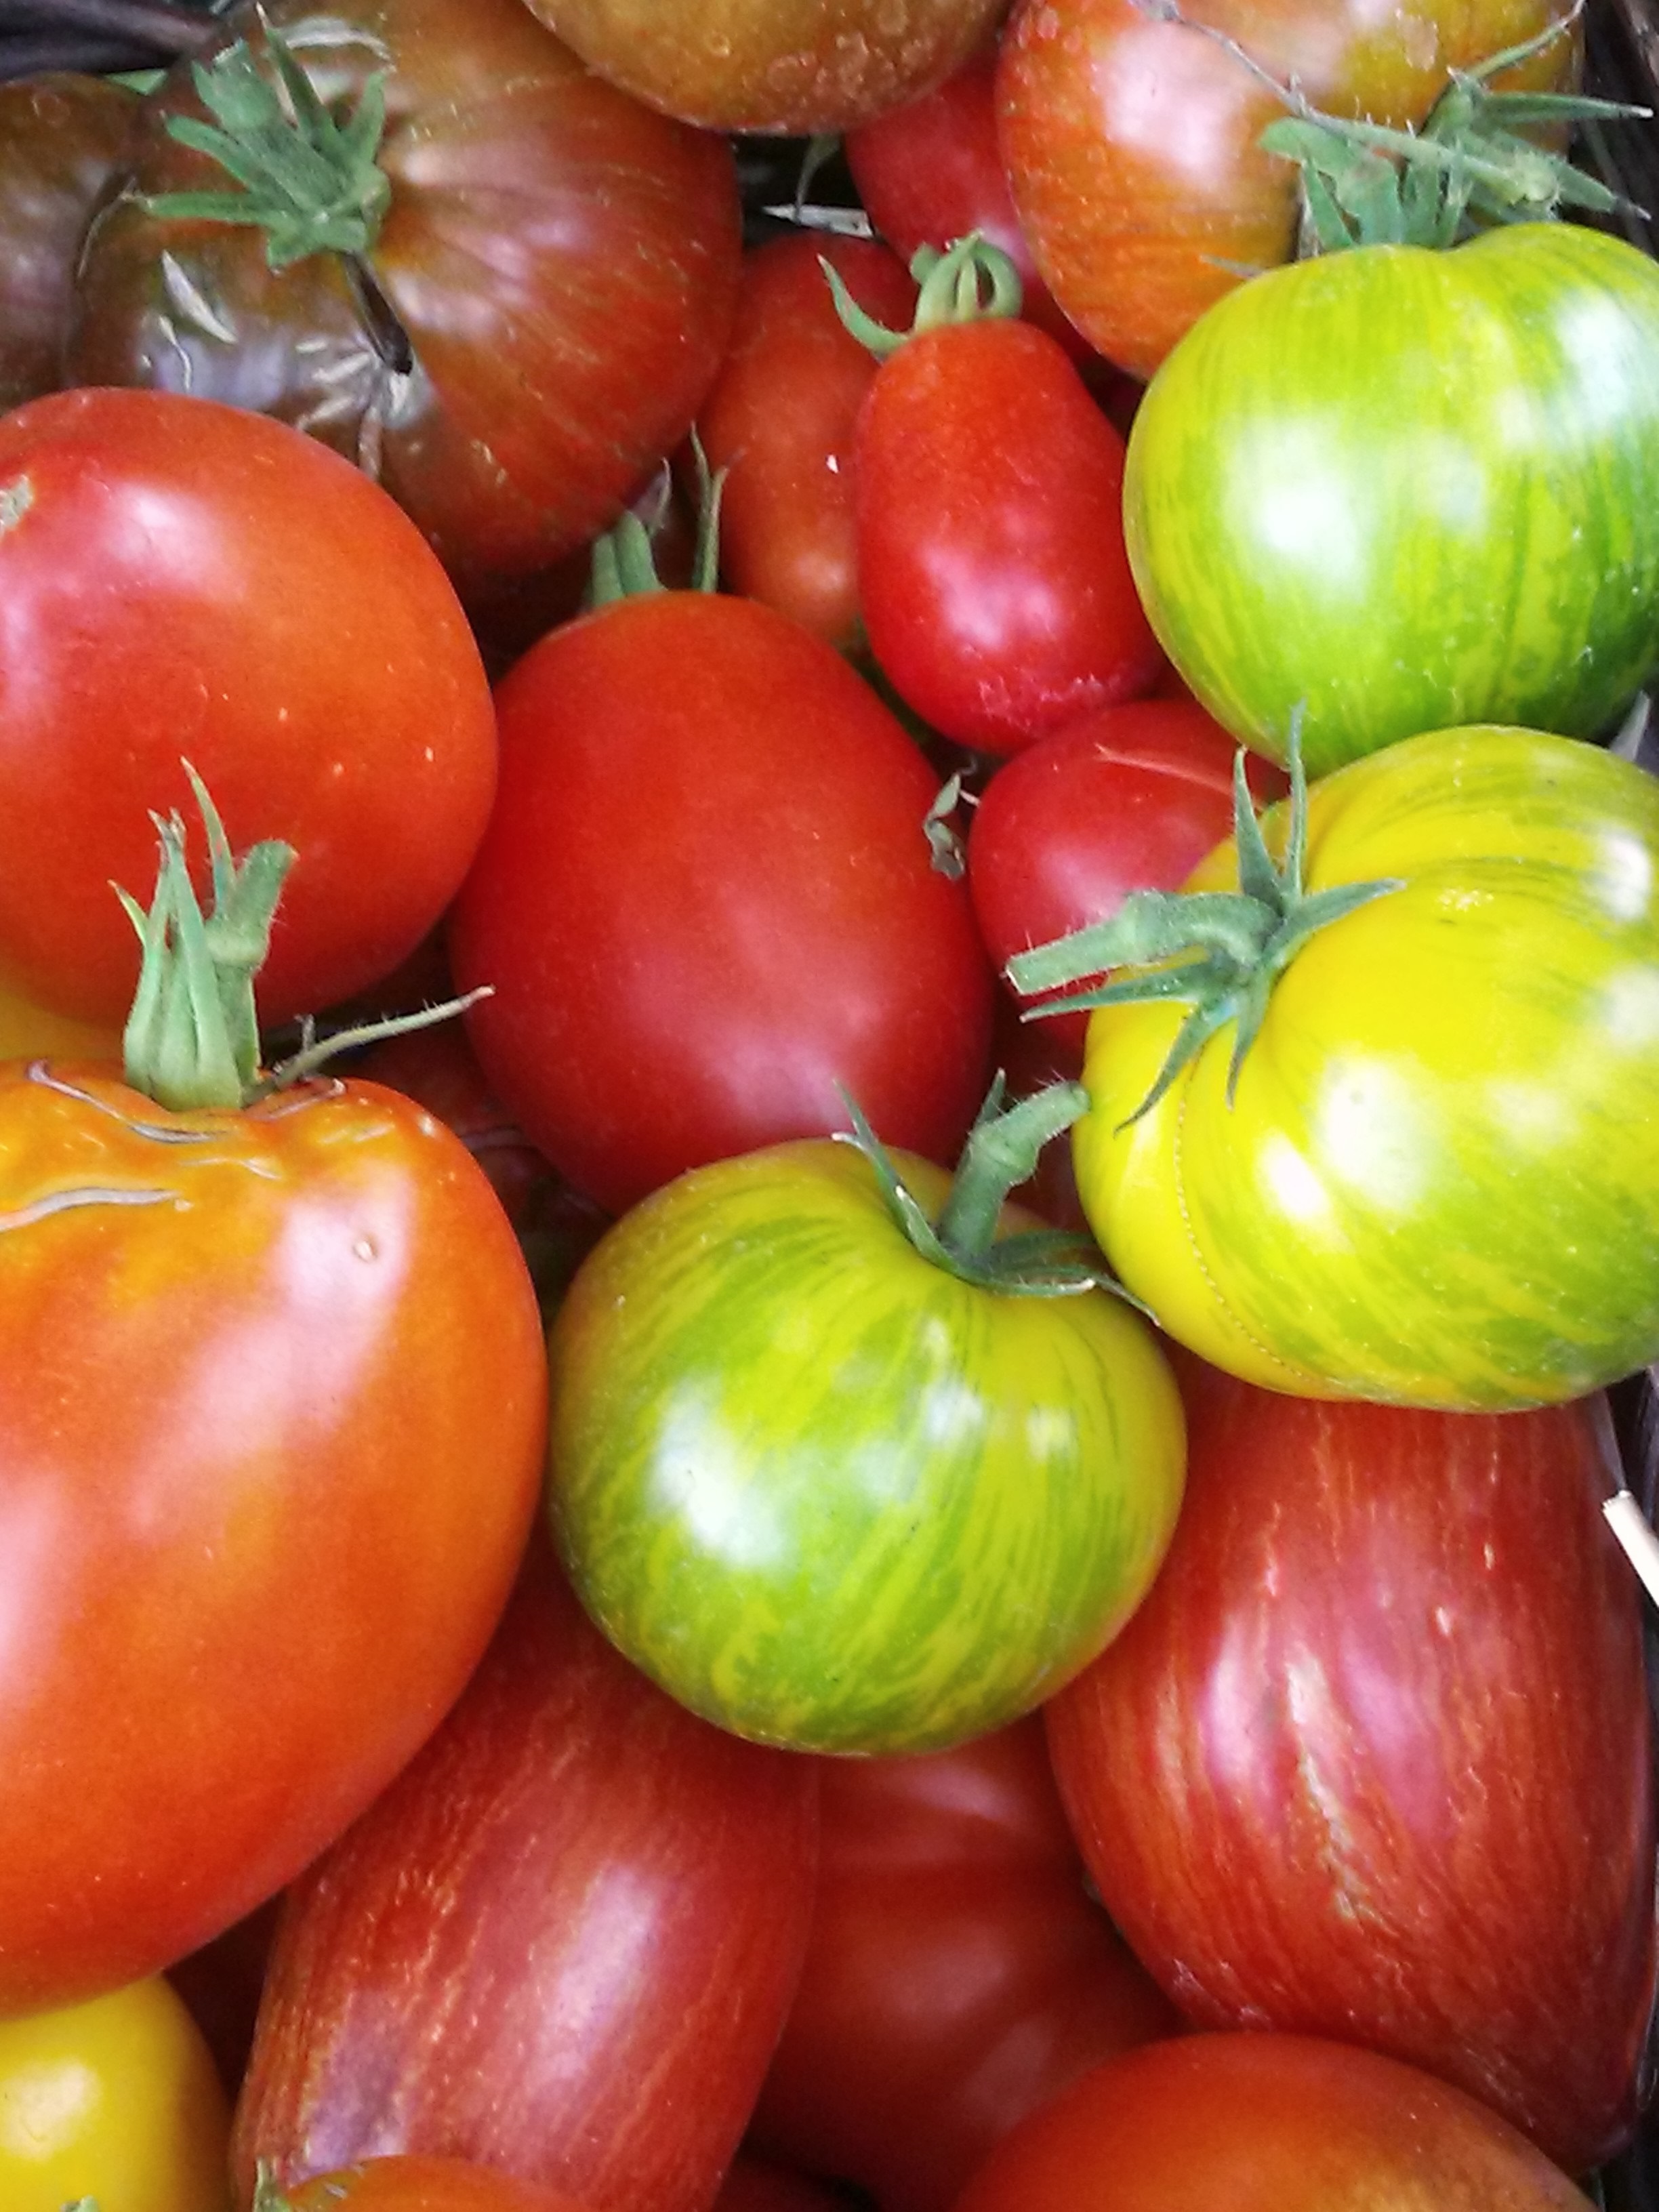 Heirloom Tomato and Vegetable Plants for Sale!